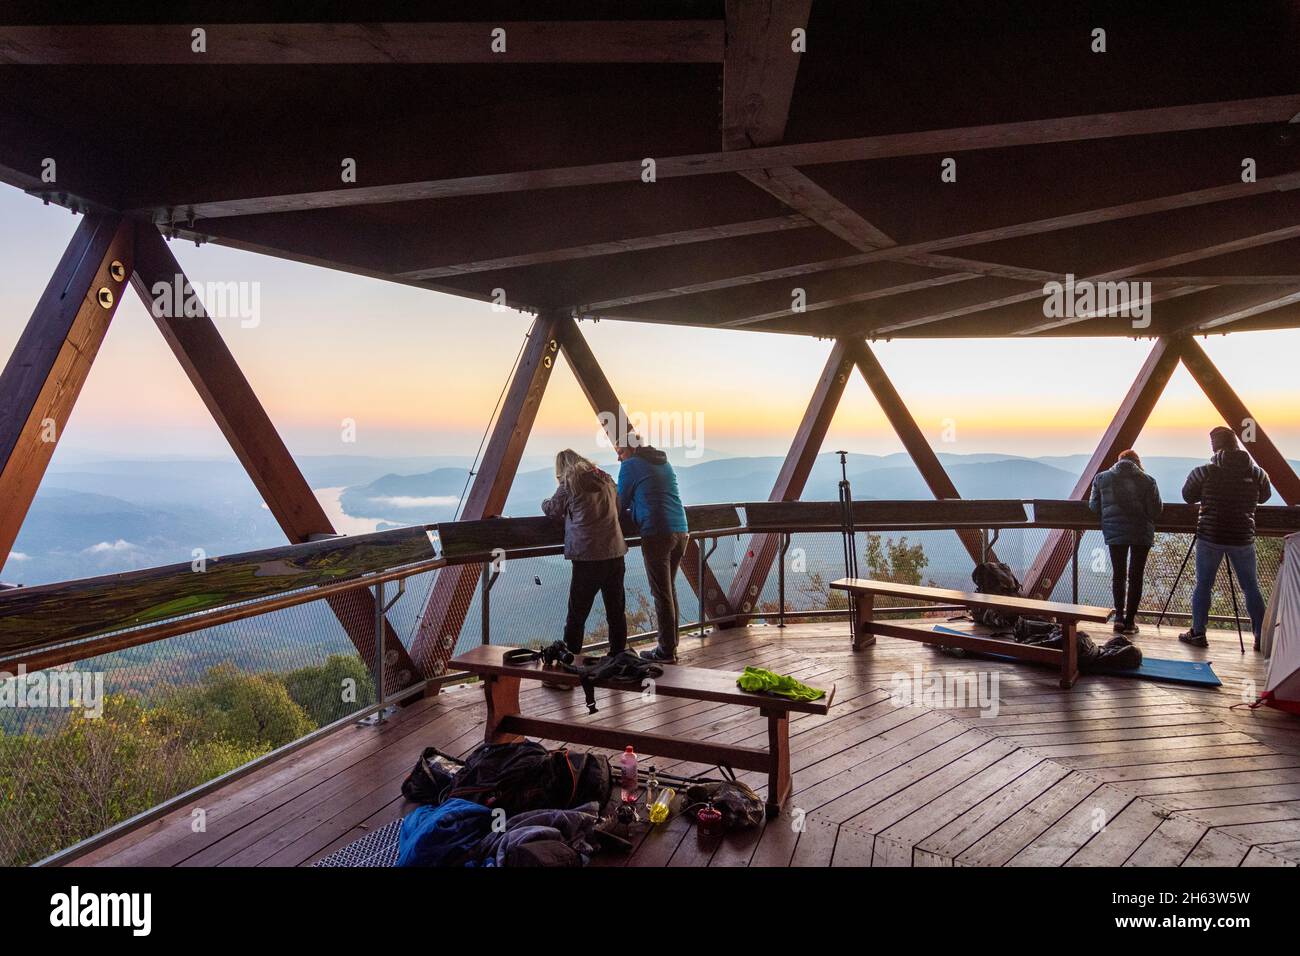 visegrad mountains,bend of danube river,view to börzsöny mountains,view from summit predikaloszek (predigerstuhl,preaching chair),observation tower,hiker in danube-ipoly national park,pest,hungary Stock Photo